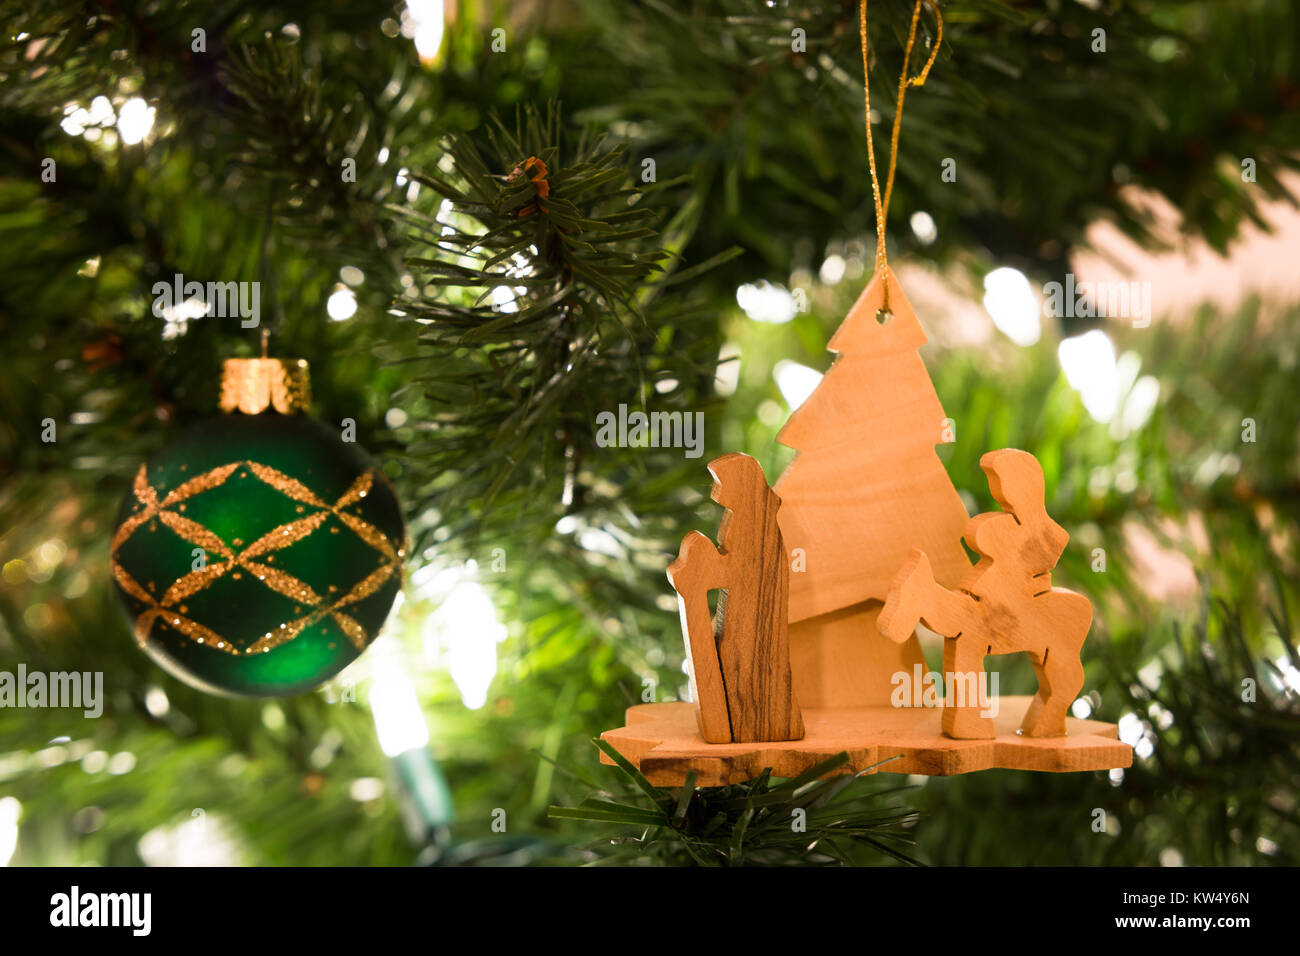 Small wooden ornament of Christmas story Stock Photo